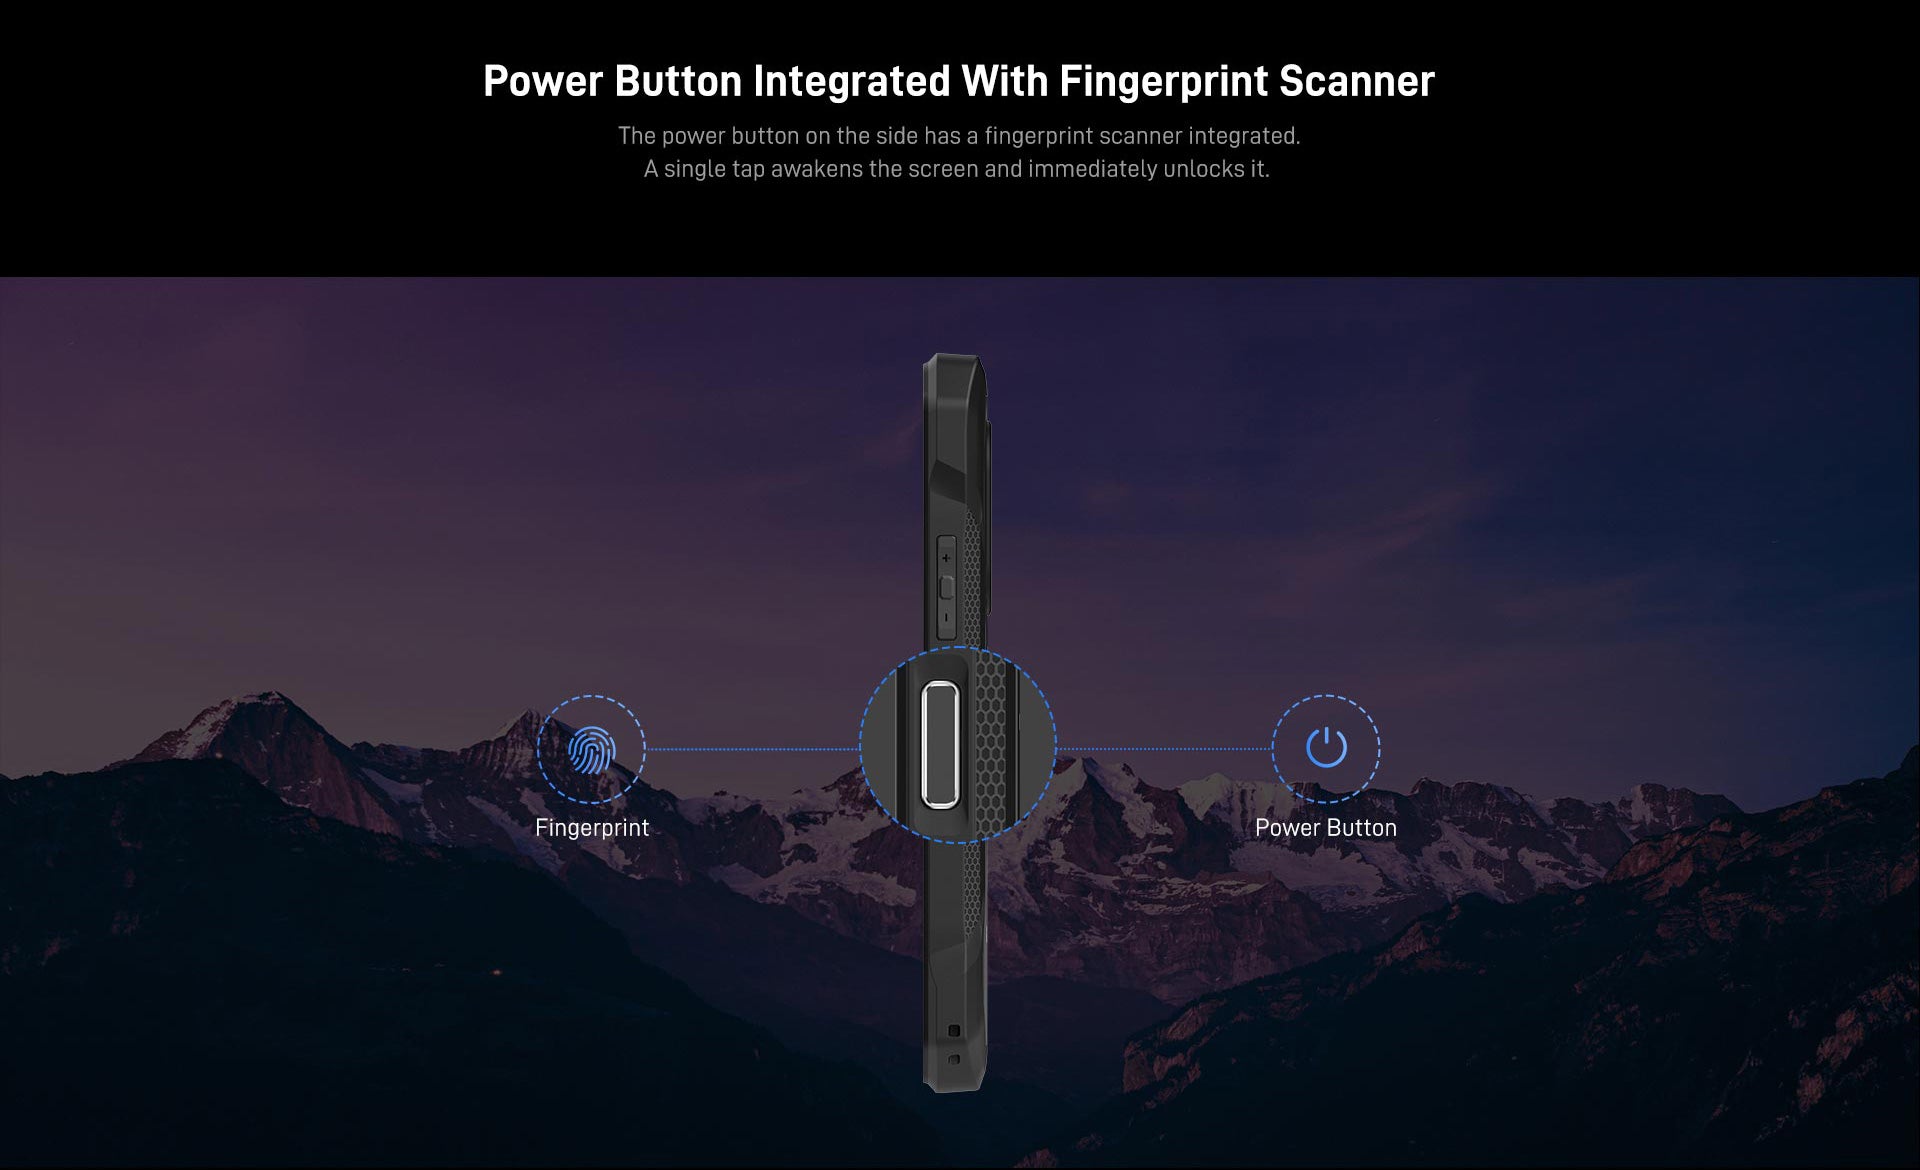 Power Button Integrated With Fingerprint Scanner